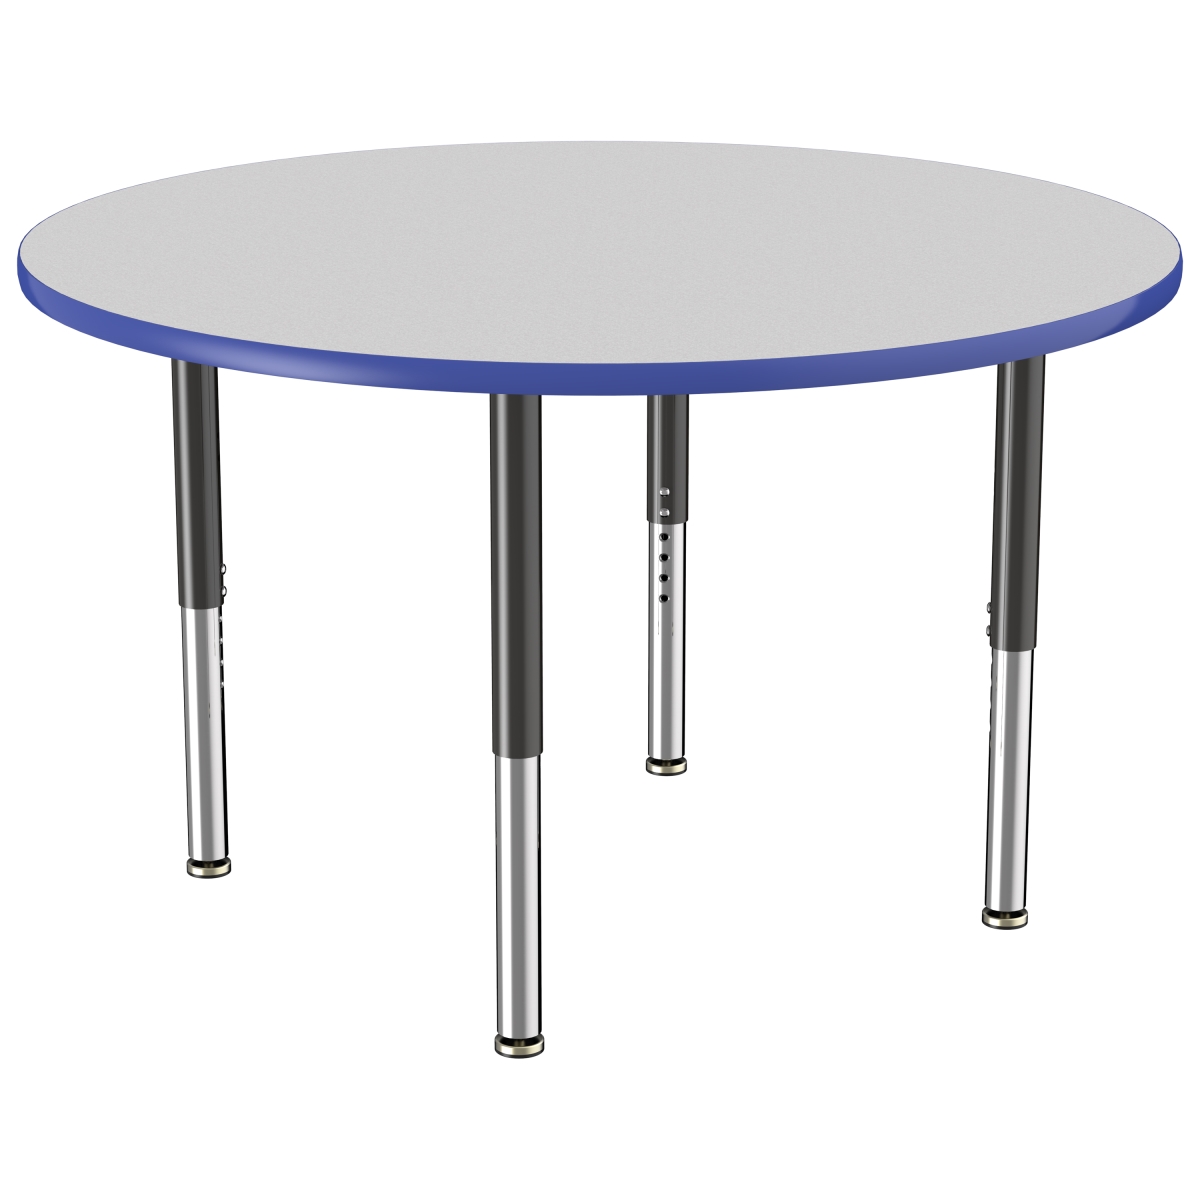 10046-gybl 48 In. Round T-mold Adjustable Activity Table With Super Leg - Grey & Blue